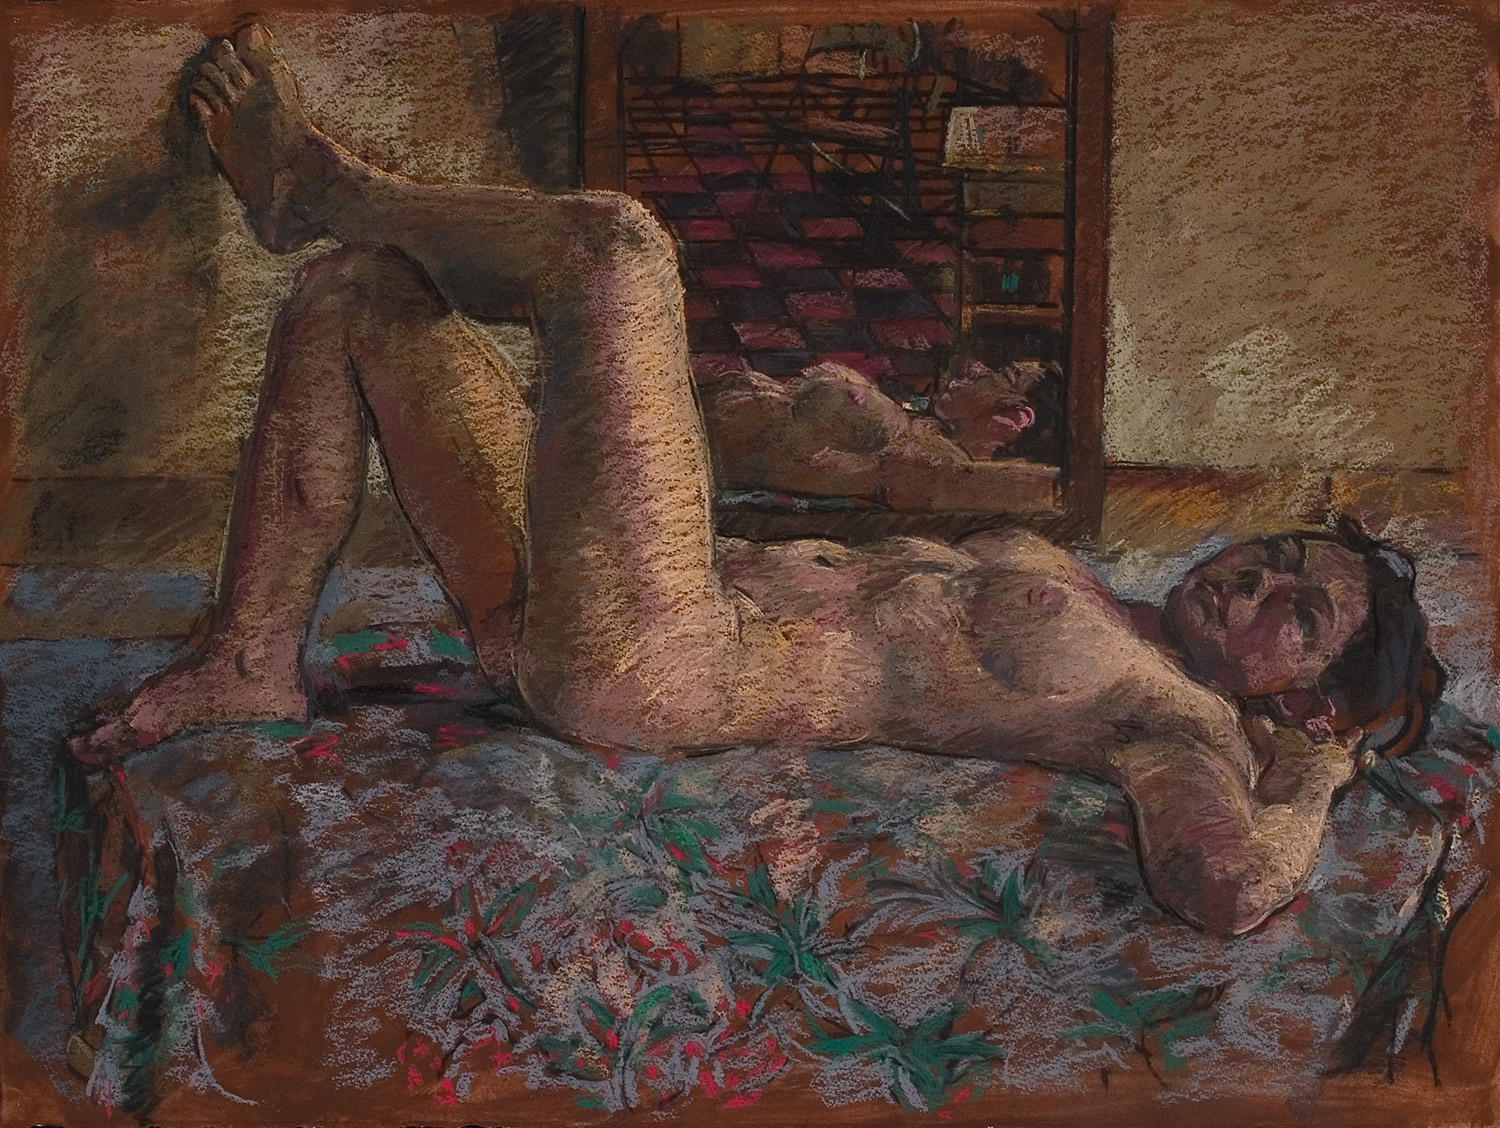 reclining figure II by Frederick Ortner (larger)